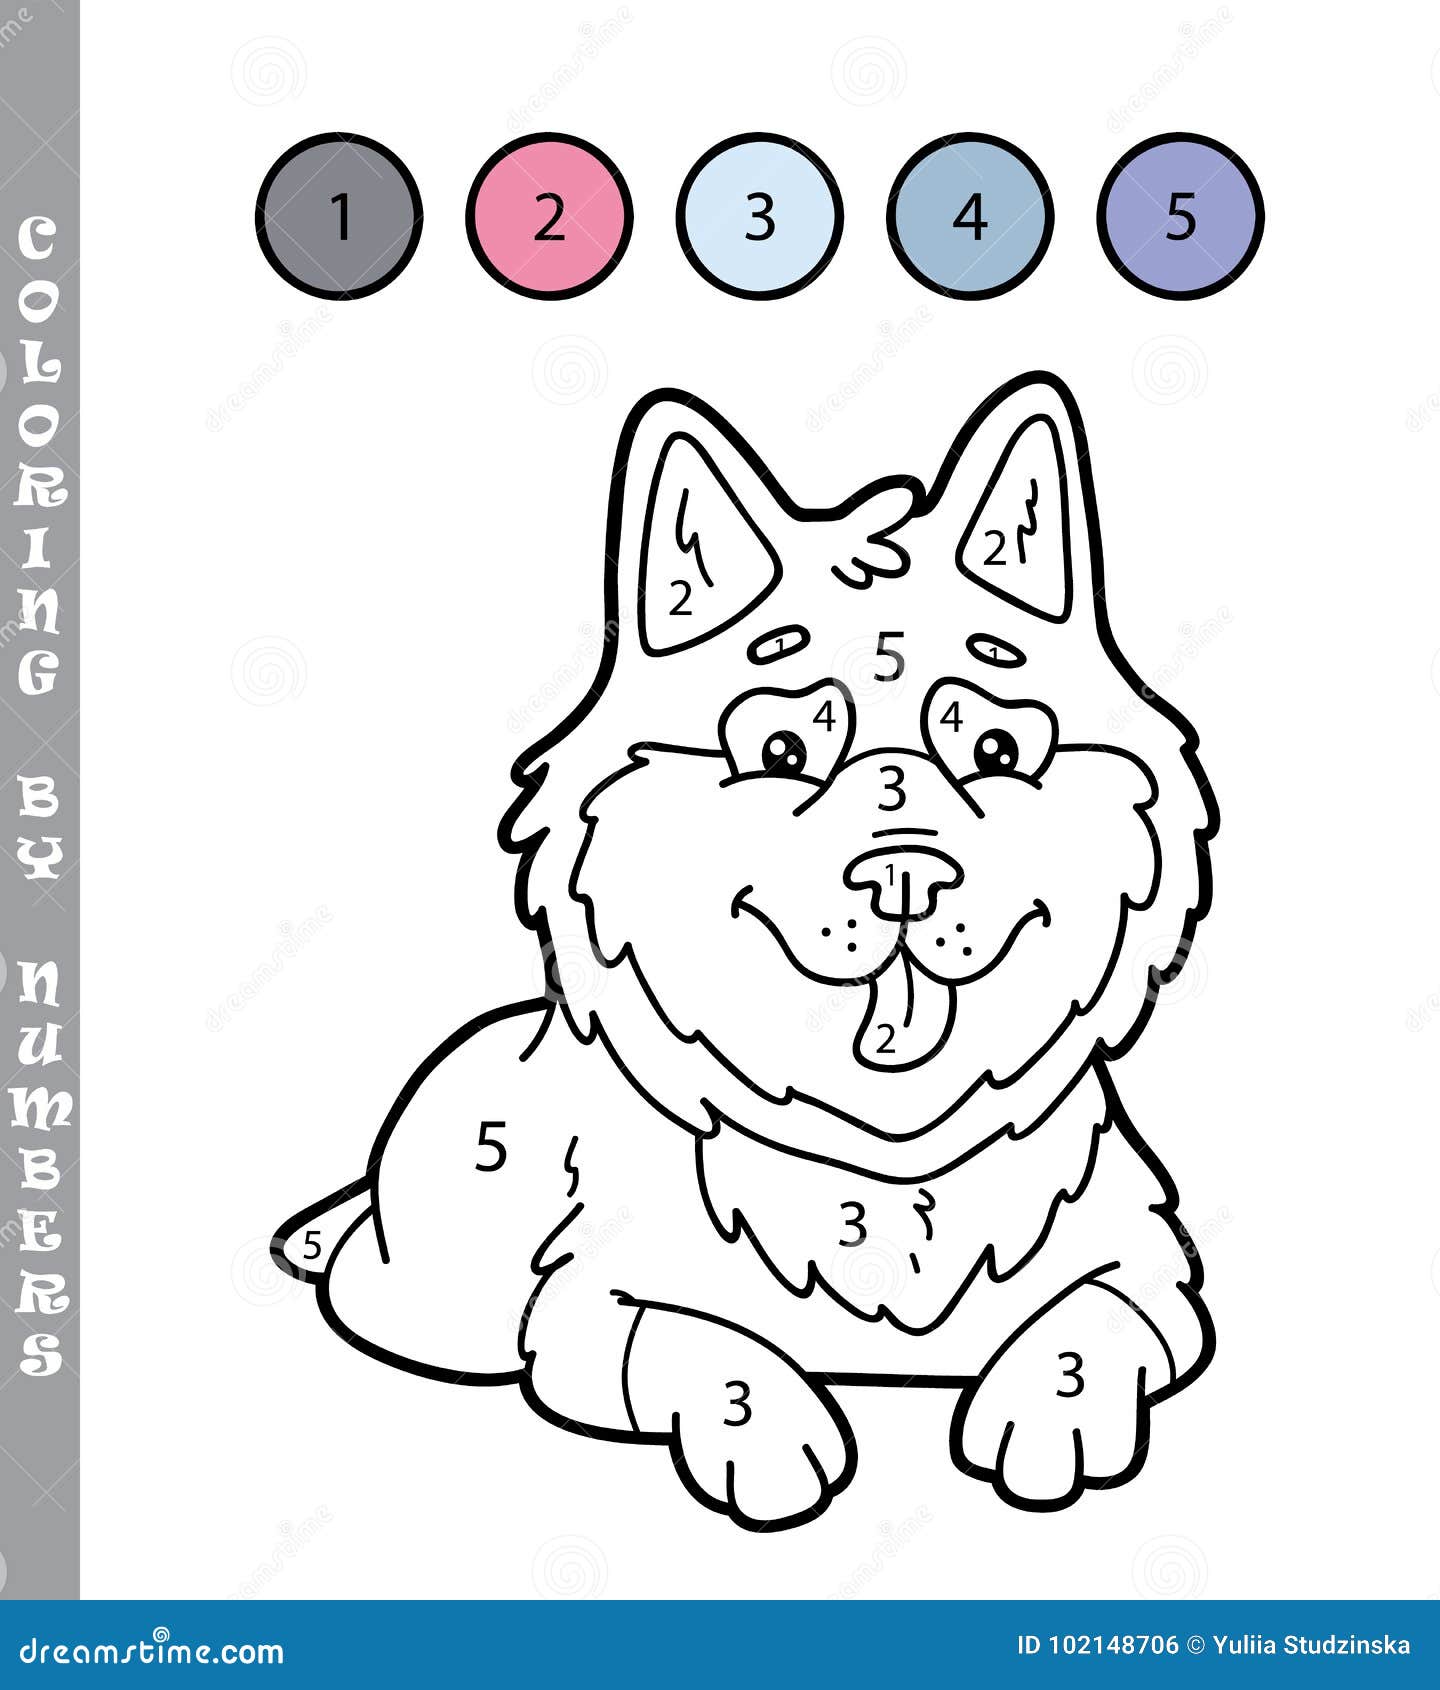 Coloring Page by Numbers Dog Stock Vector - Illustration of line, kids